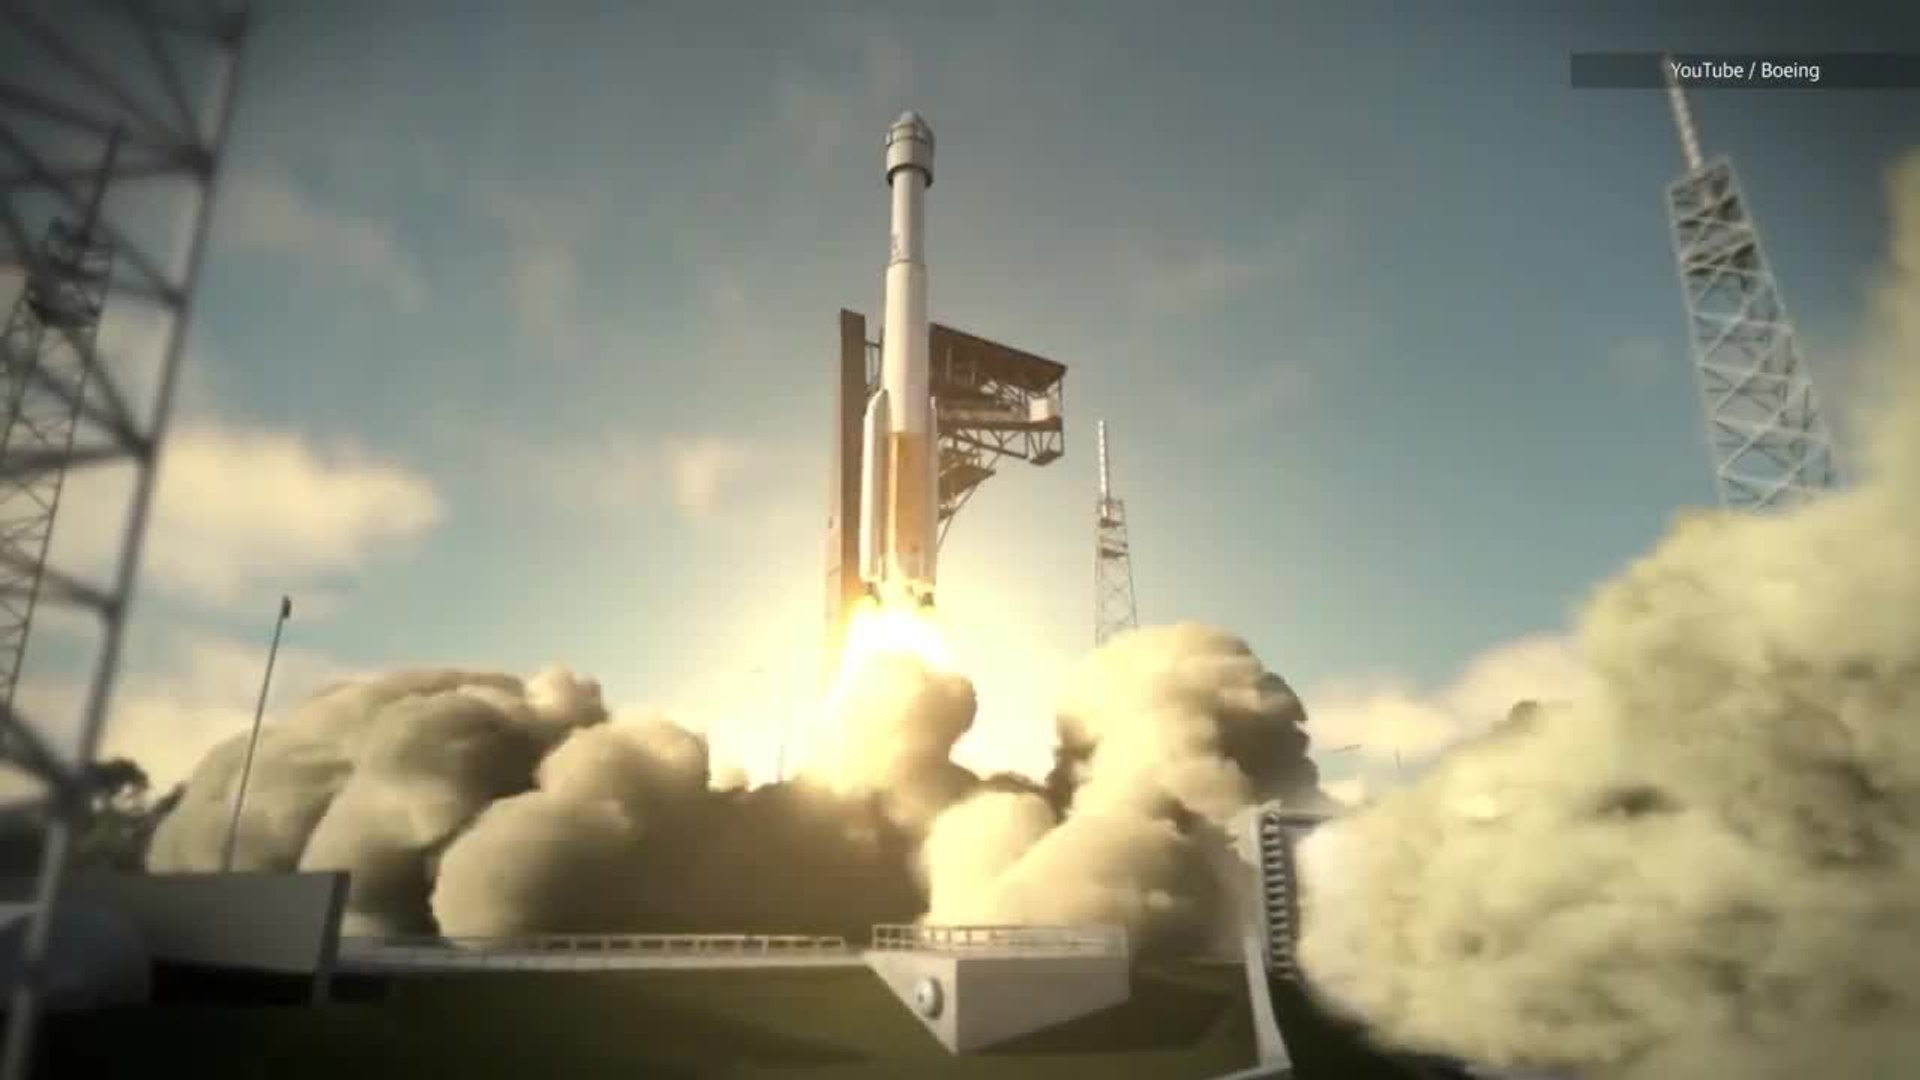 SpaceX and Boeing's space taxis are two of the most exciting things to happen in space history. They